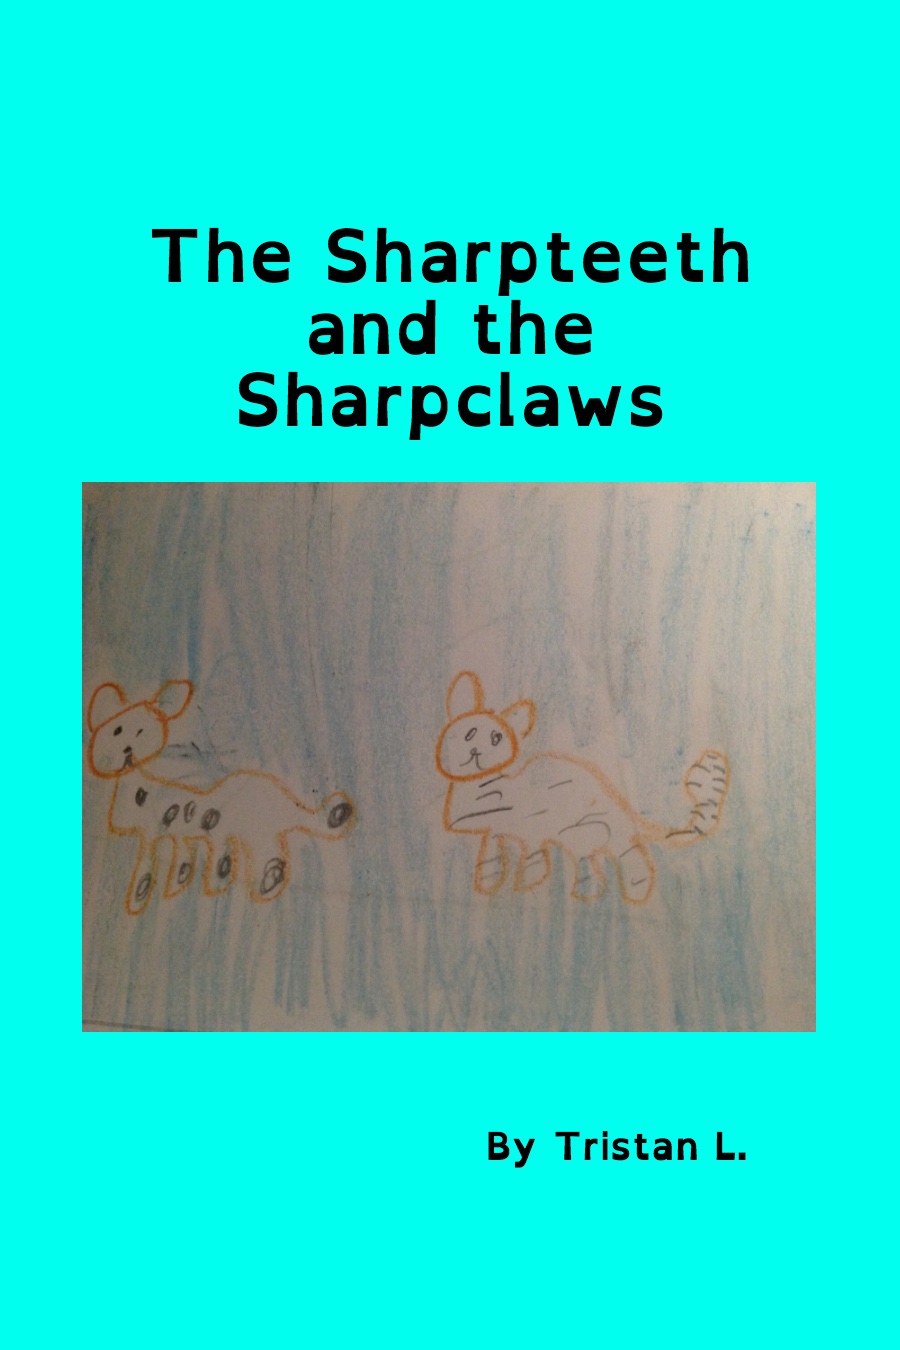 The Sharpteeth and Sharpclaws by Tristan L